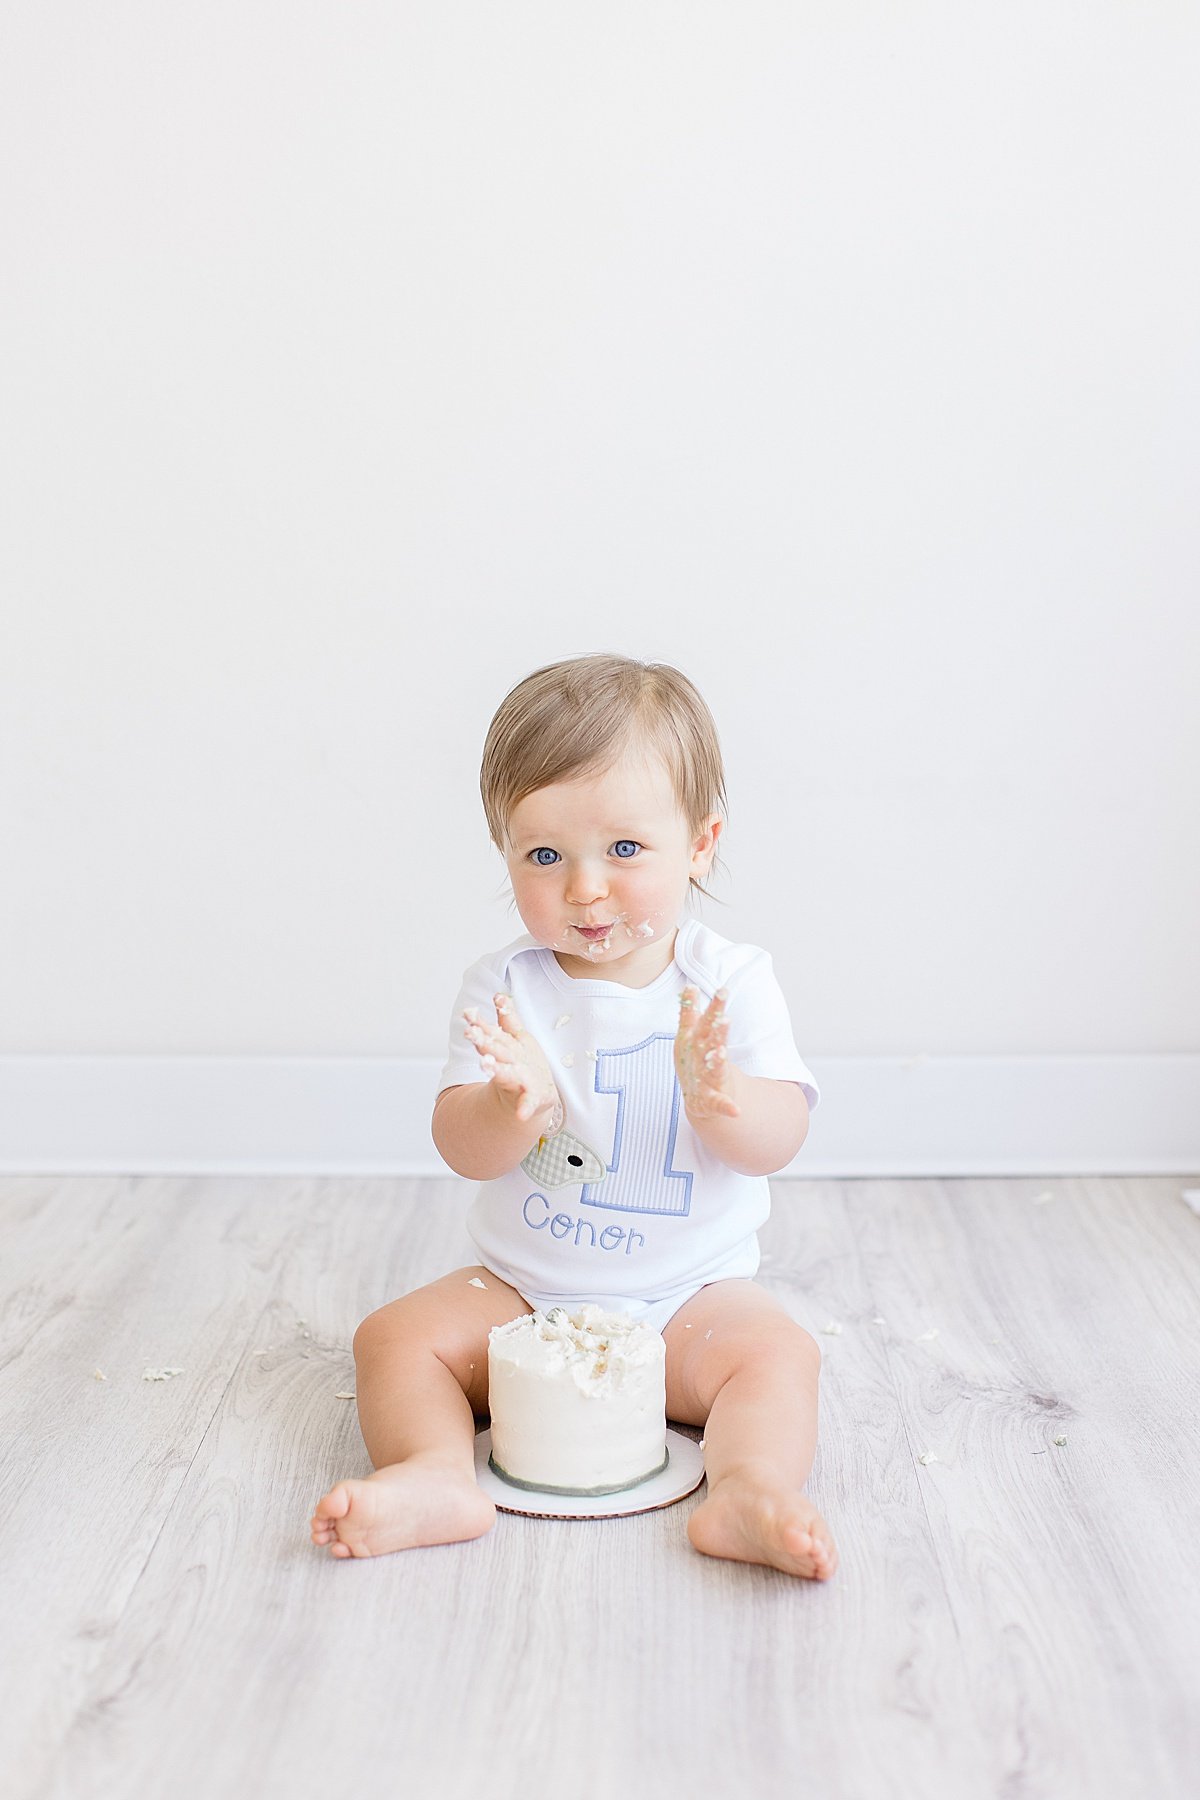 Happy baby smiling with first smash cake | Newport Photographer Ambre WIlliams in Studio